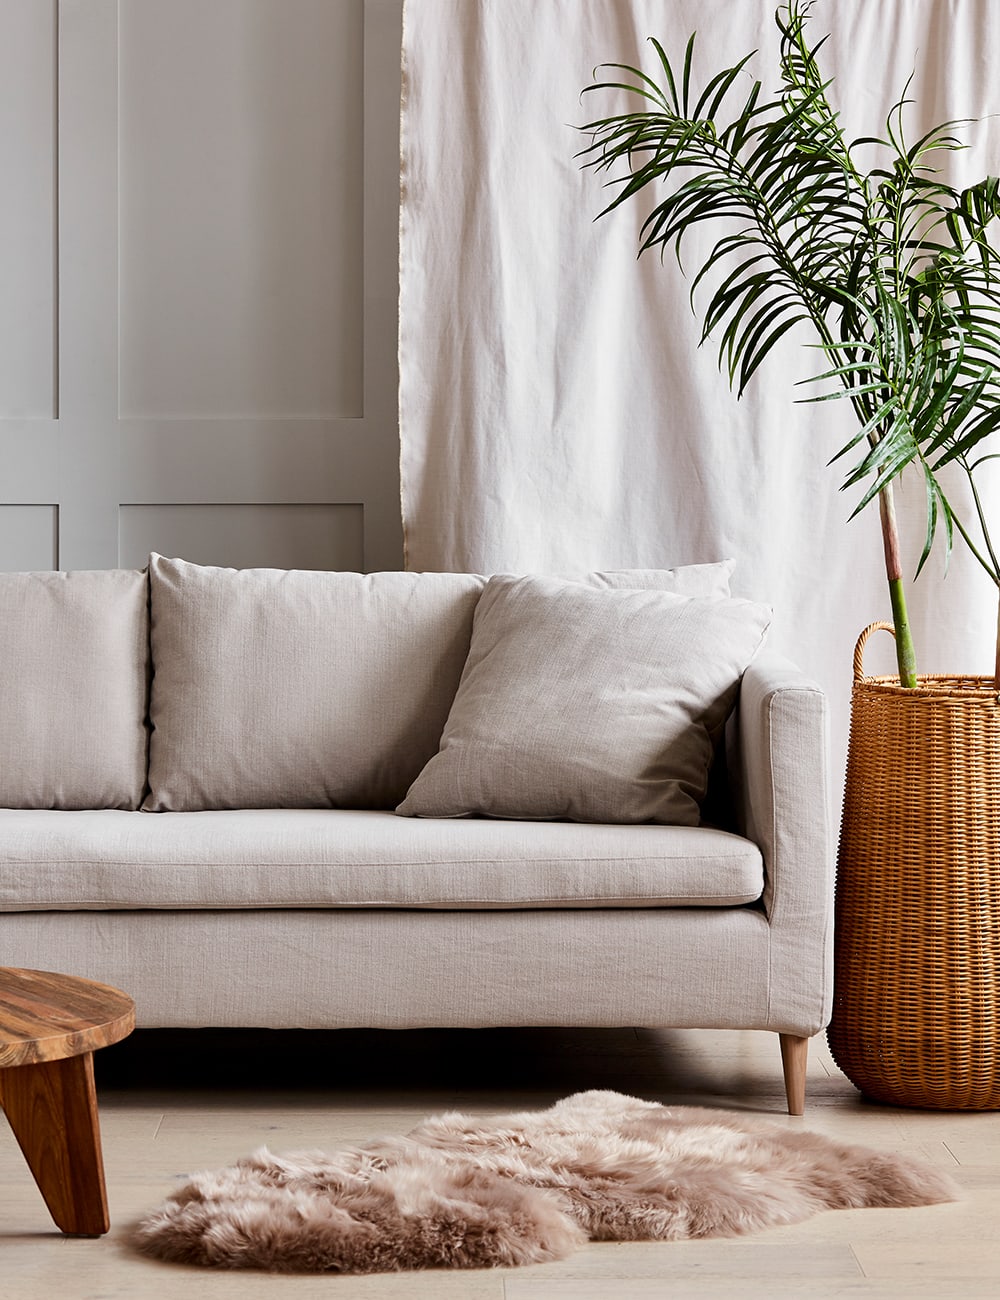 Why is linen fabric the future trend in the interior design industry?